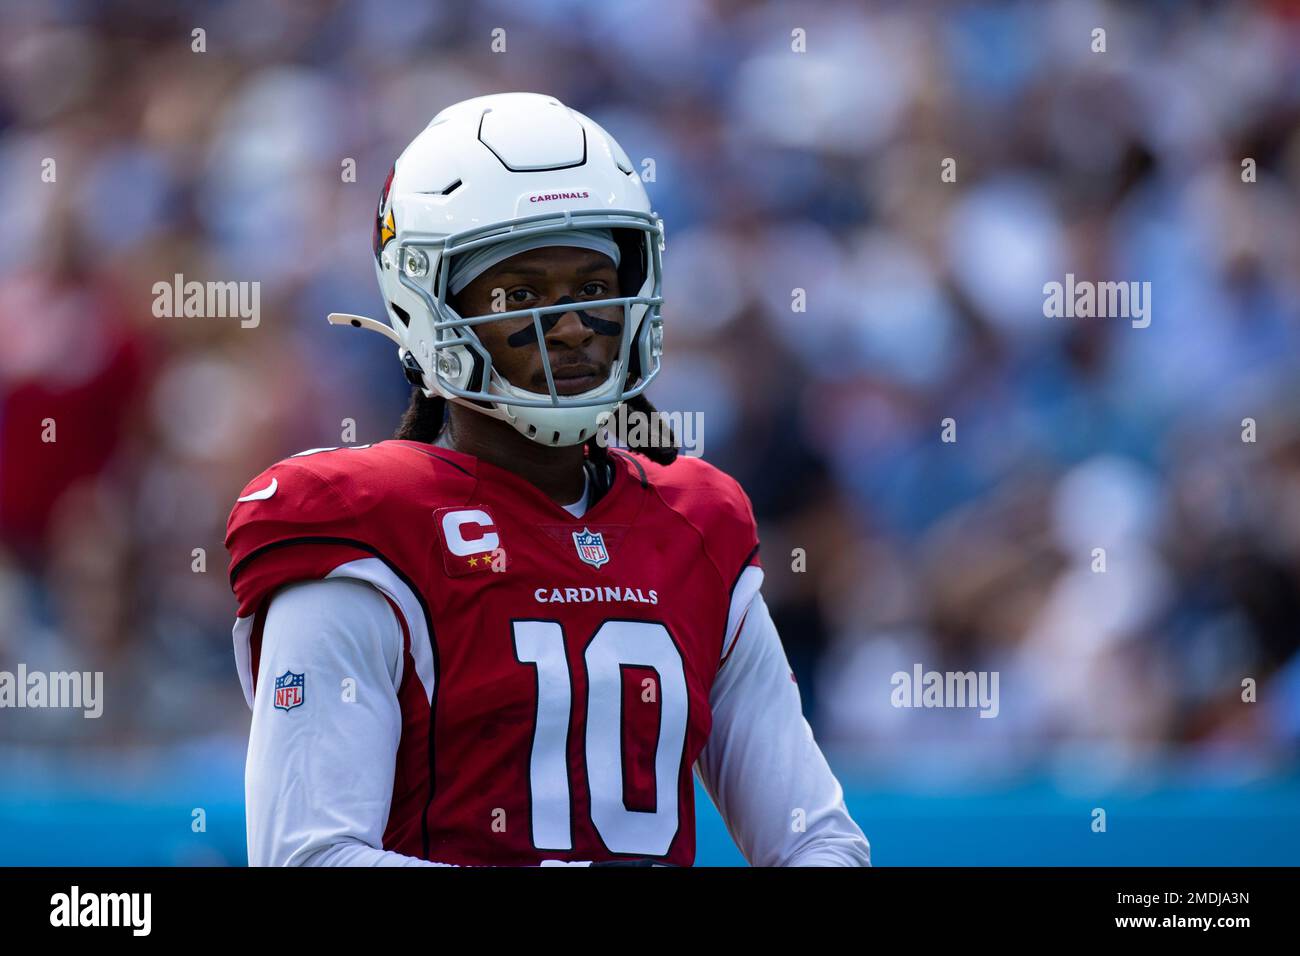 Arizona Cardinals wide receiver DeAndre Hopkins (10) walks on the field  against the Tennessee Titans during the first half of an NFL football game,  Sunday, Sep. 12, 2021, in Nashville, Tenn. (AP